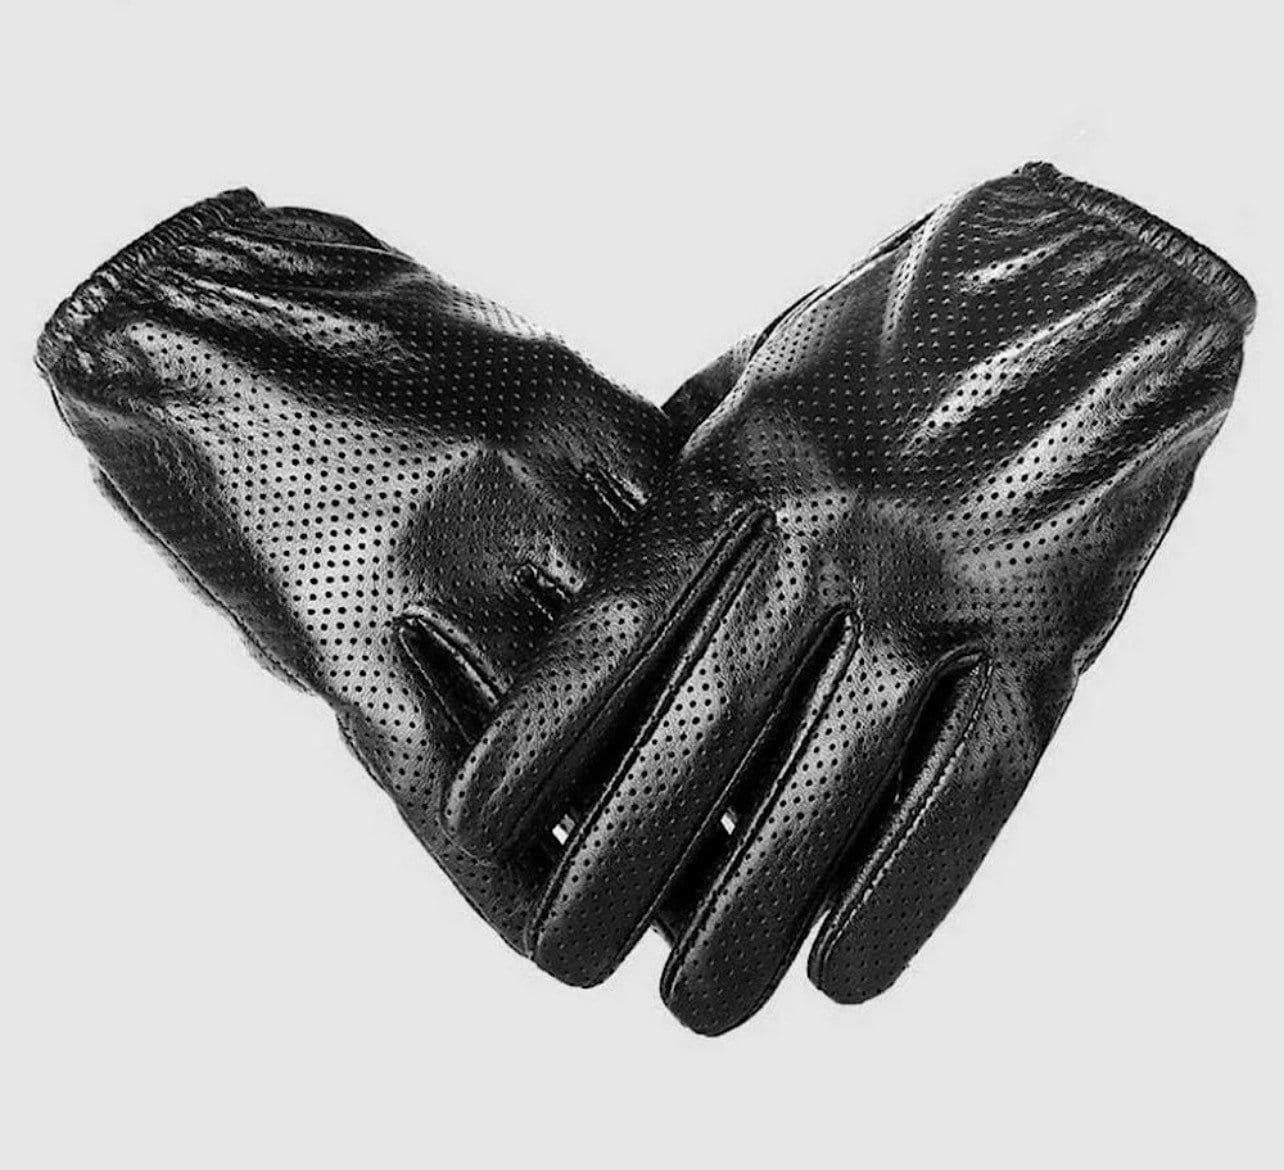 Nomex & Leather Fire Retardant Gloves Pilot,Ninja,Racing,Flying-Touch  screen